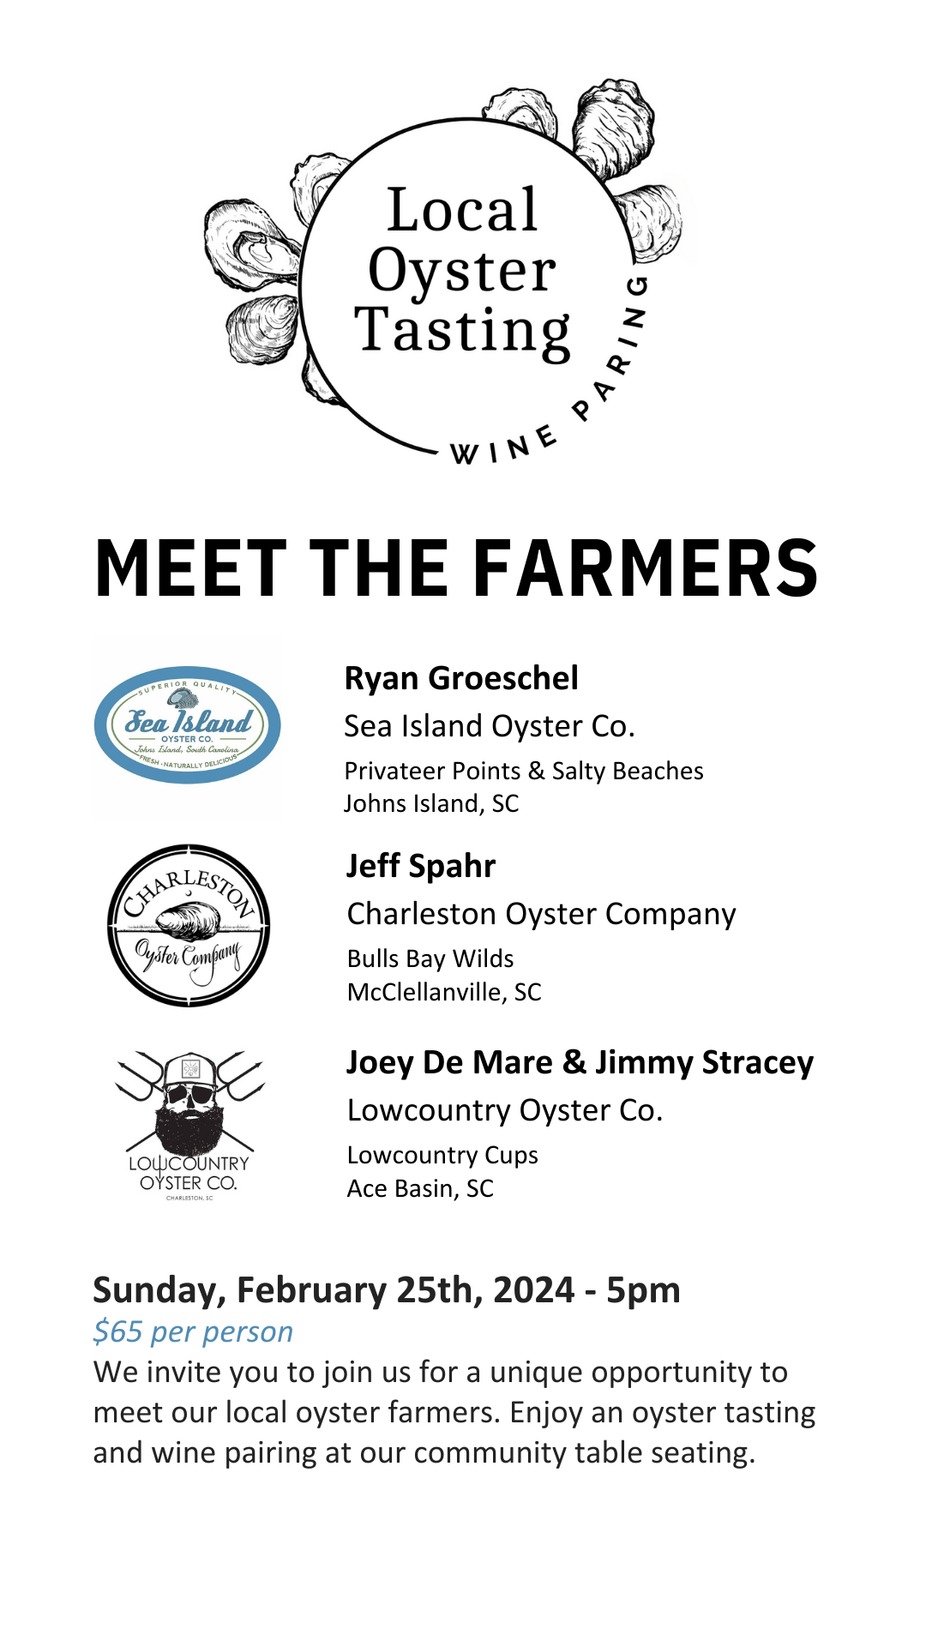 Meet the Farmers - Oyster Tasting event photo